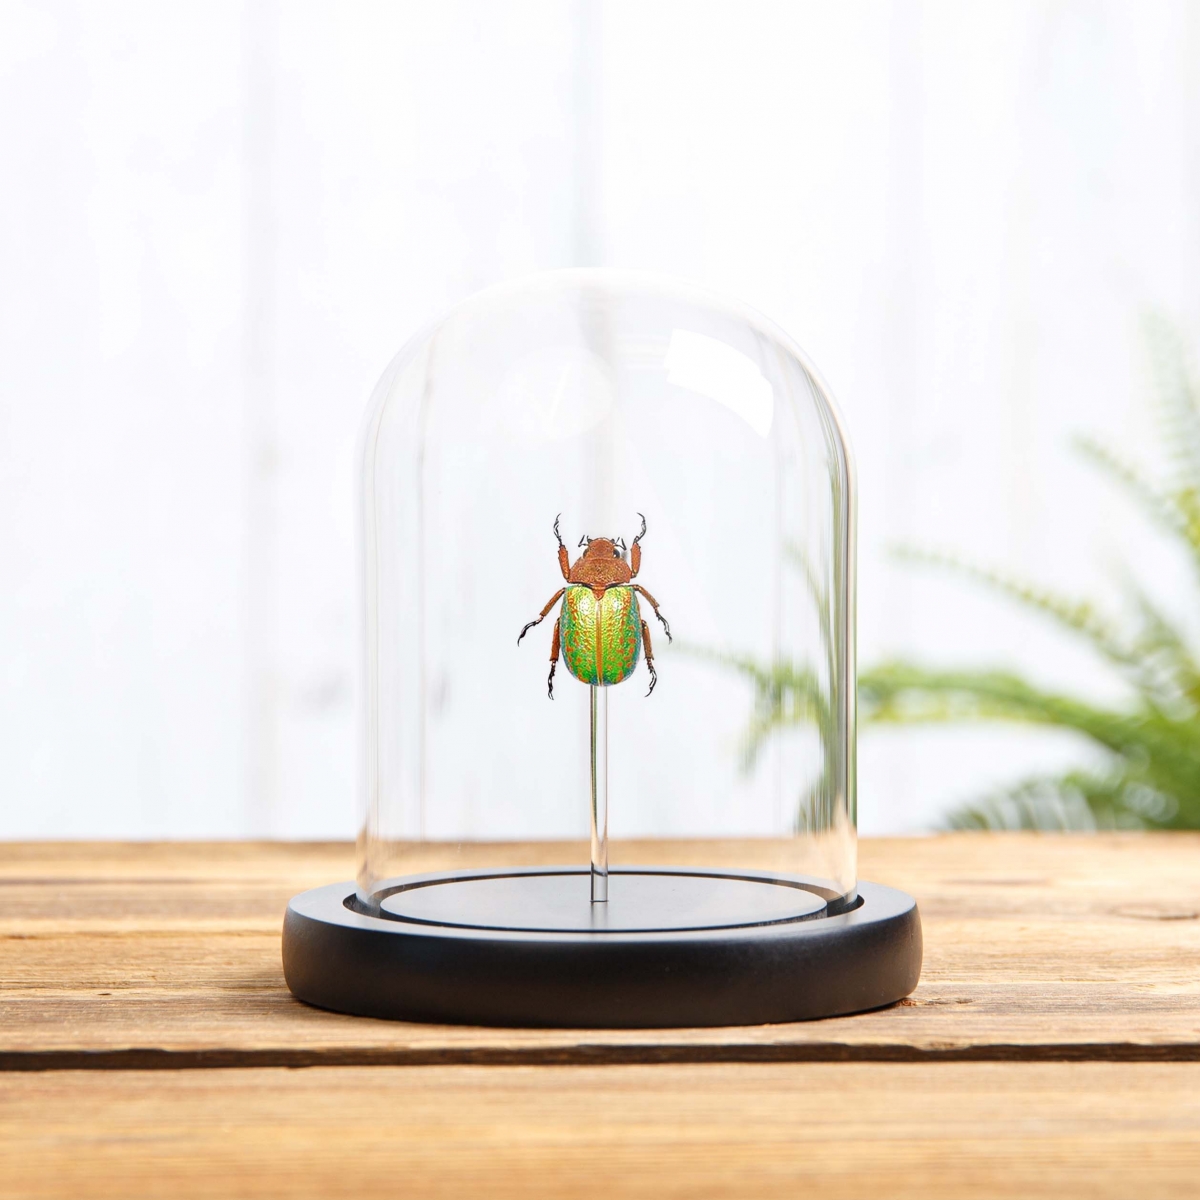 Minibeast Jewel Scarab Beetle in Glass Dome with Wooden Base (Plusiotis victorina)